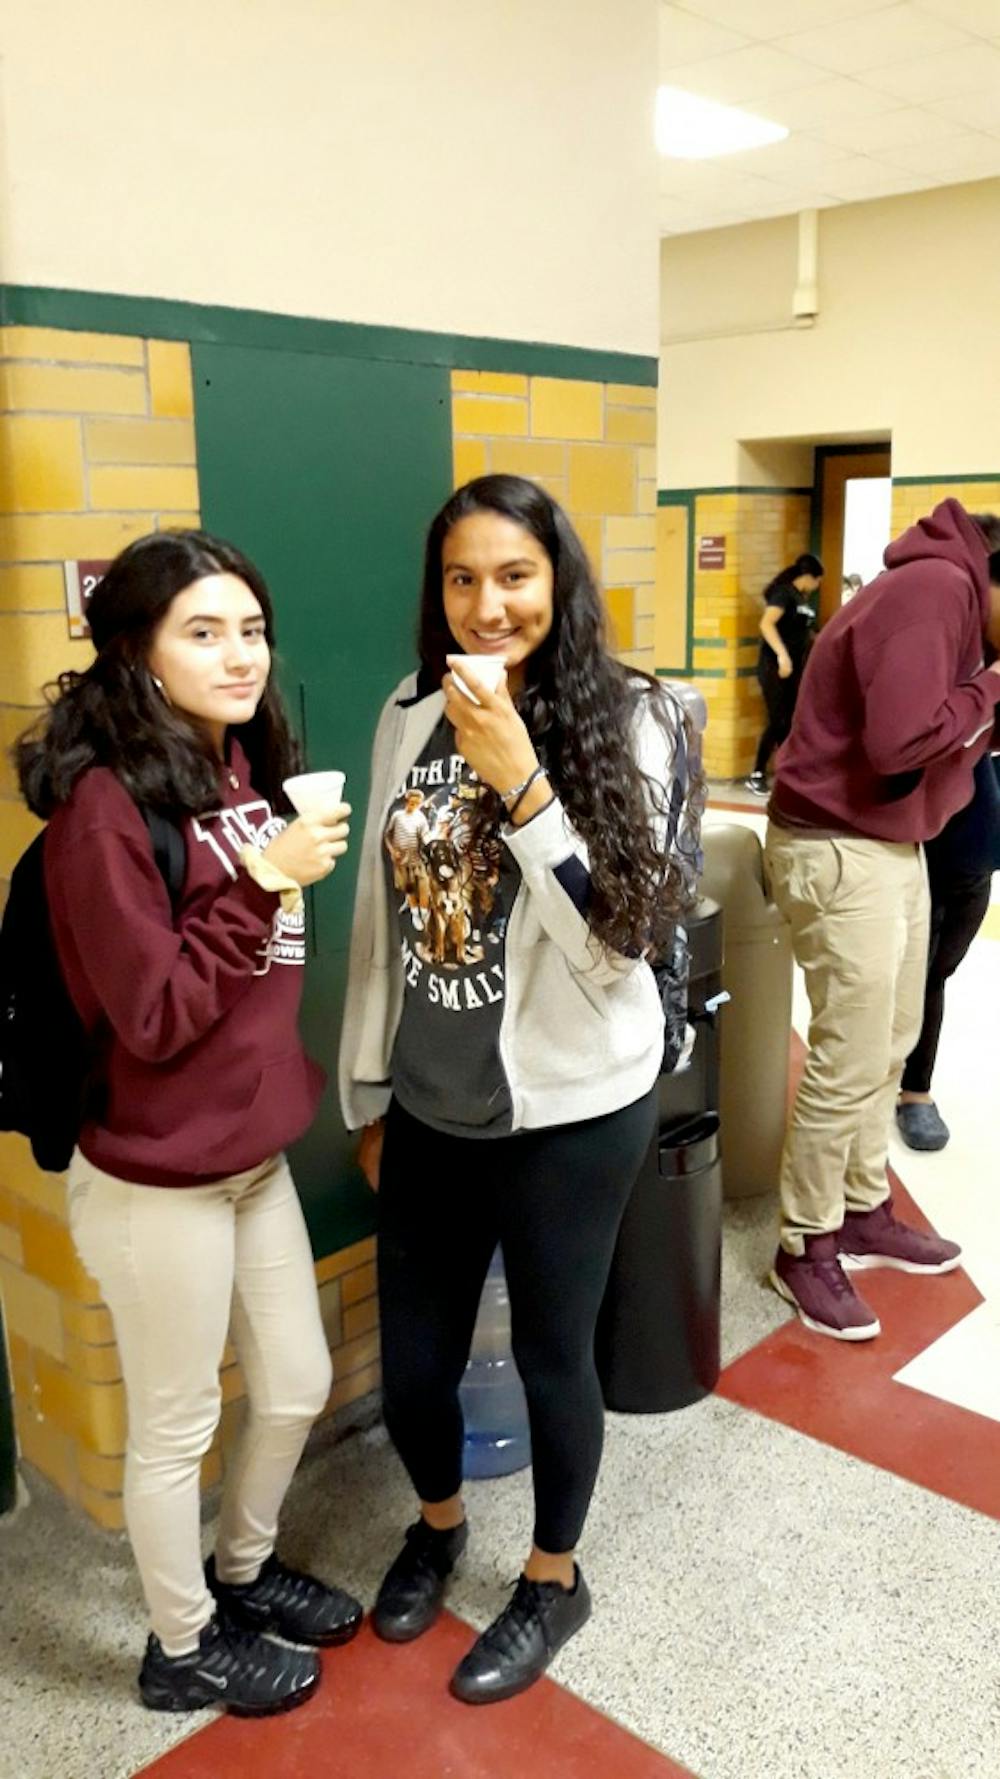 <p>Sophomores Ceslia Galindez and Frida Diaz stop to grab a drink at one of the many water coolers available in the halls of Western.</p>